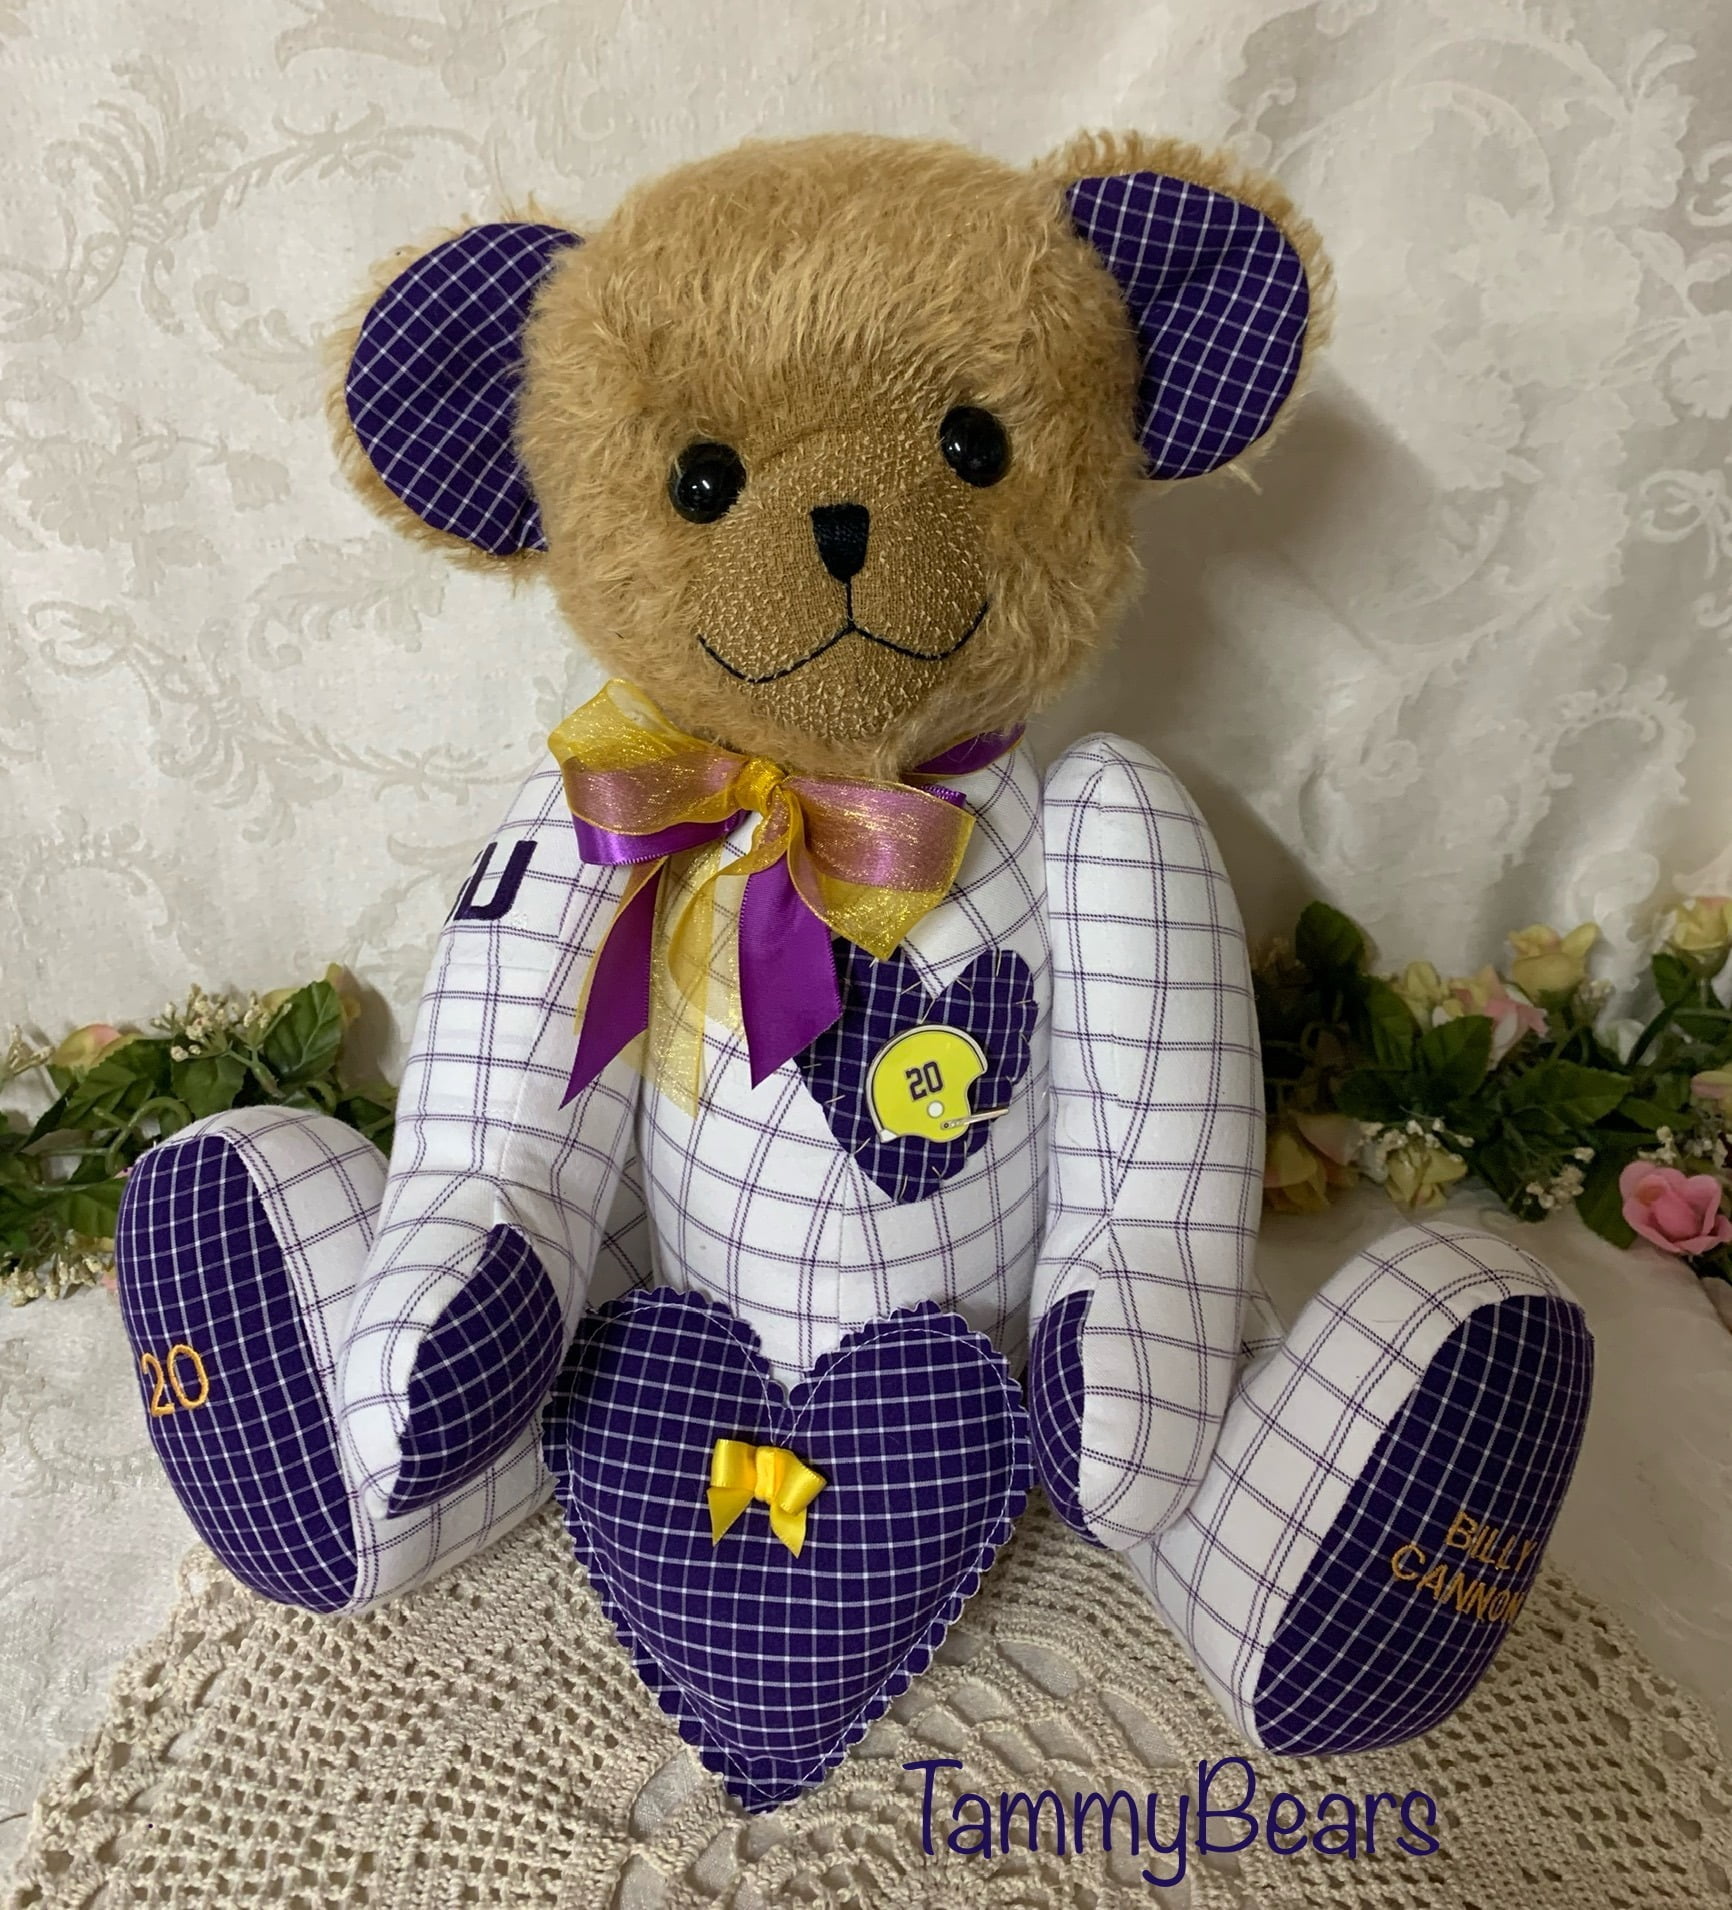 Mohair plush bear made from purplew and white clothing.